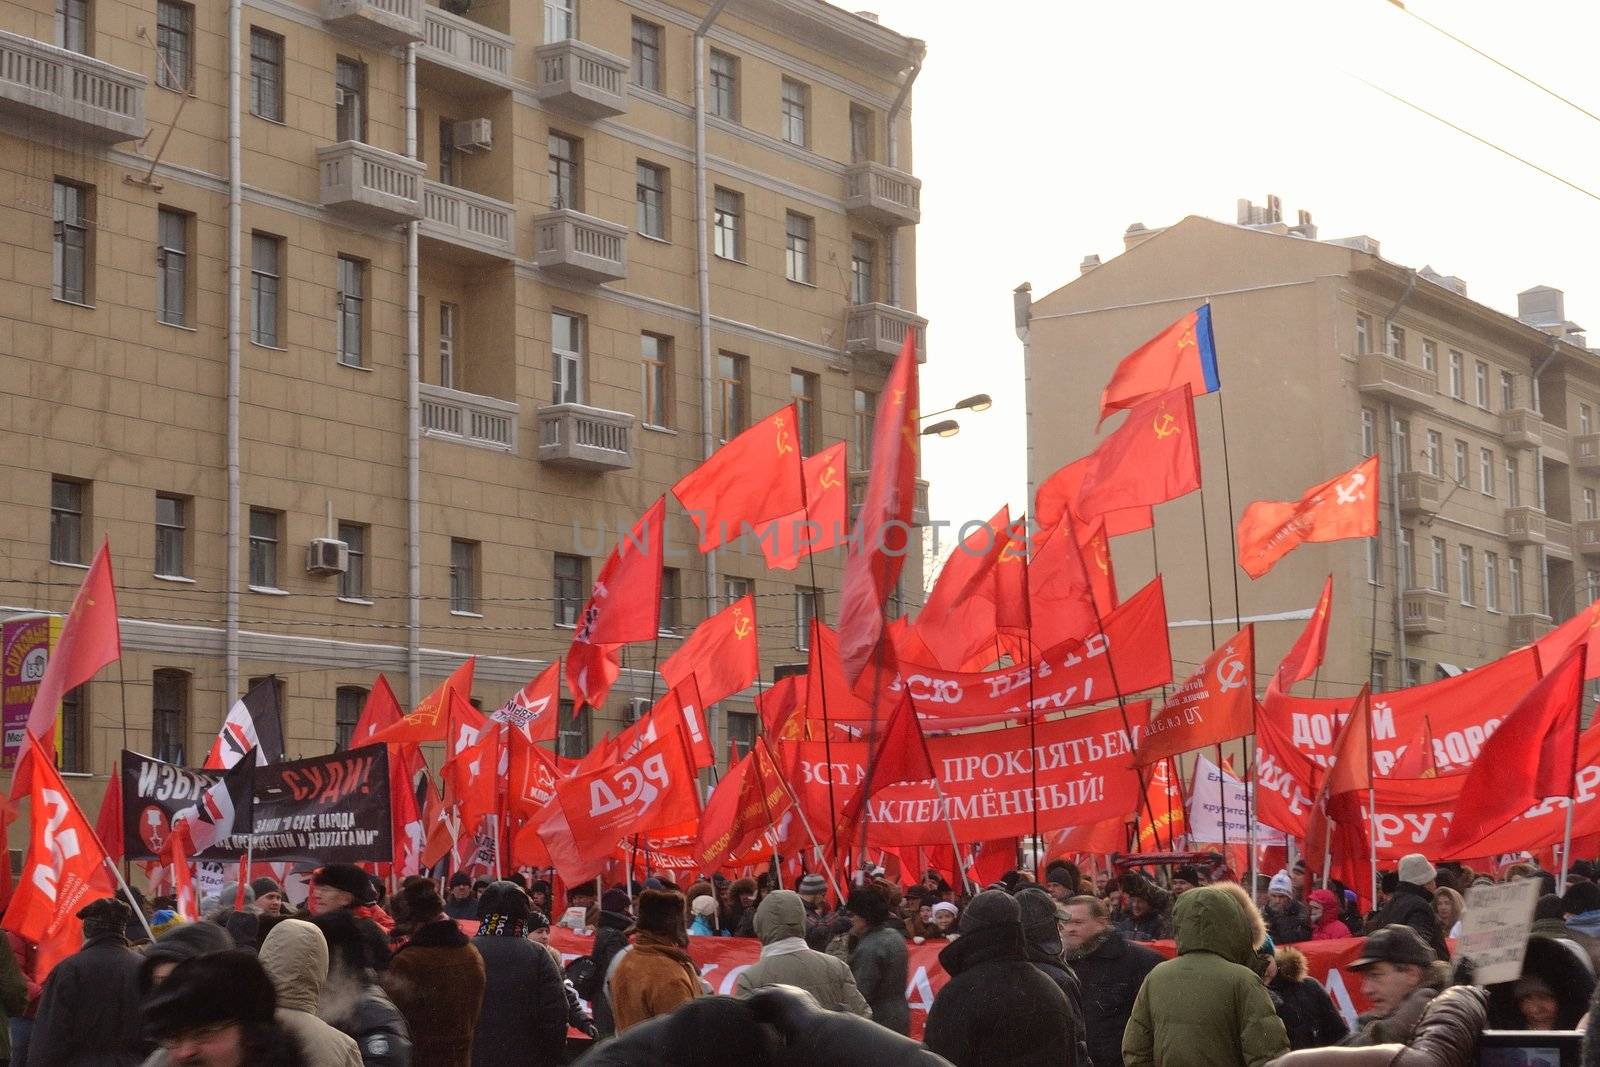 Russian communists marching against fair elections by Autre